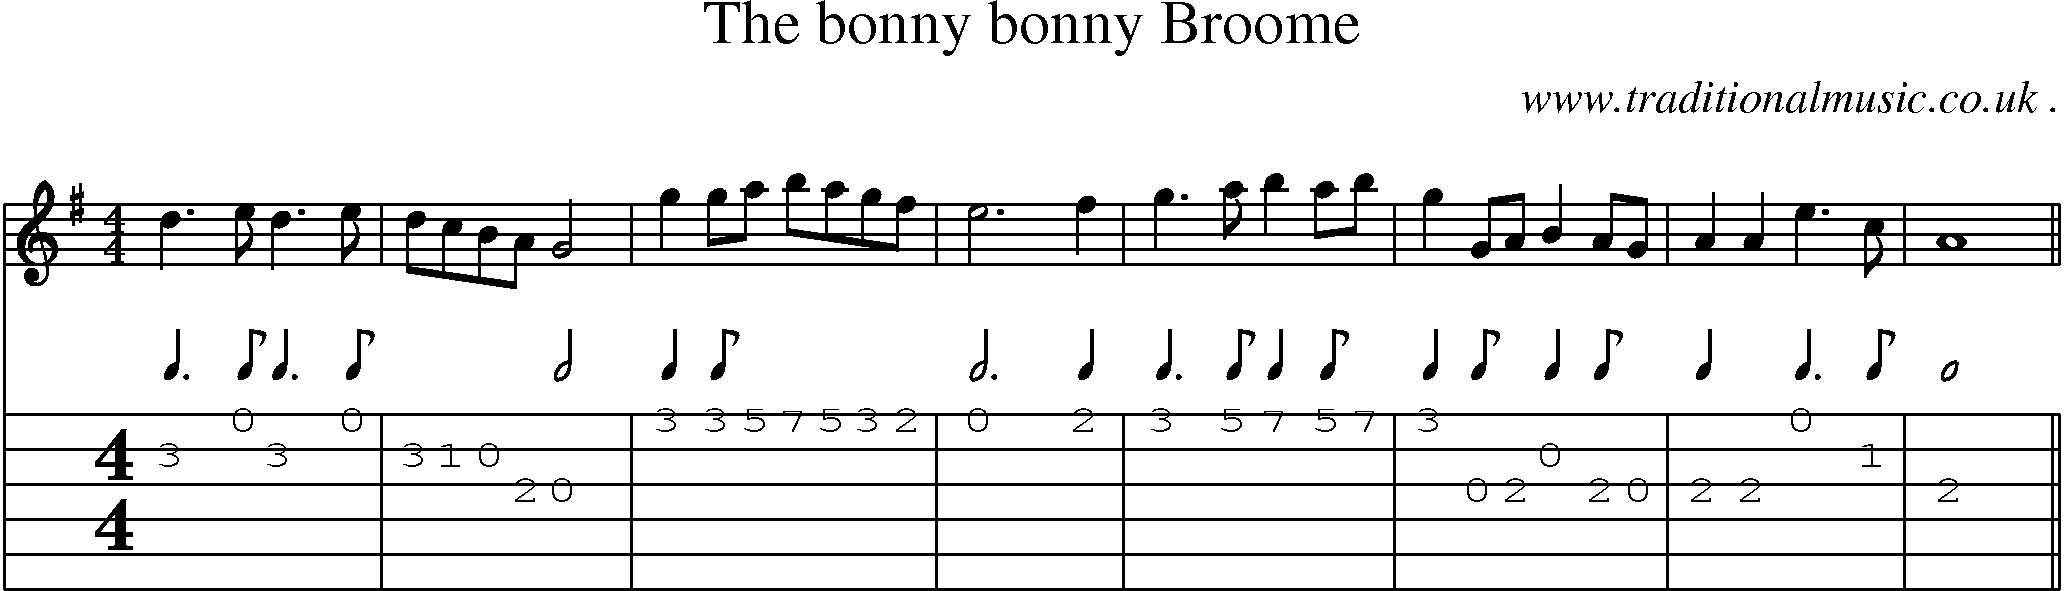 Sheet-Music and Guitar Tabs for The Bonny Bonny Broome